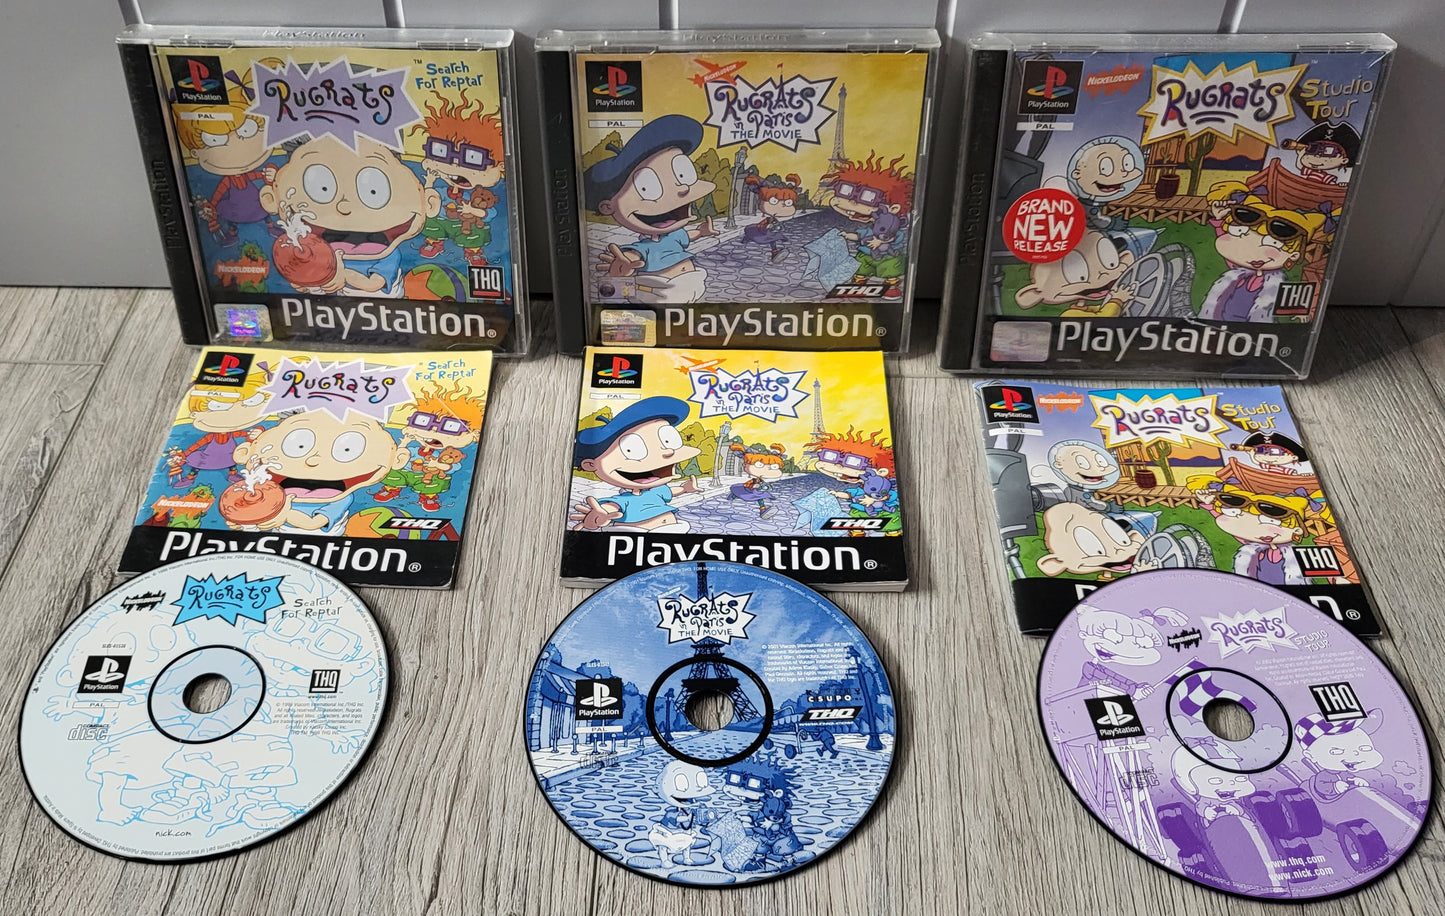 Rugrats X 3 Sony Playstation 1 (PS1) Game Bundle